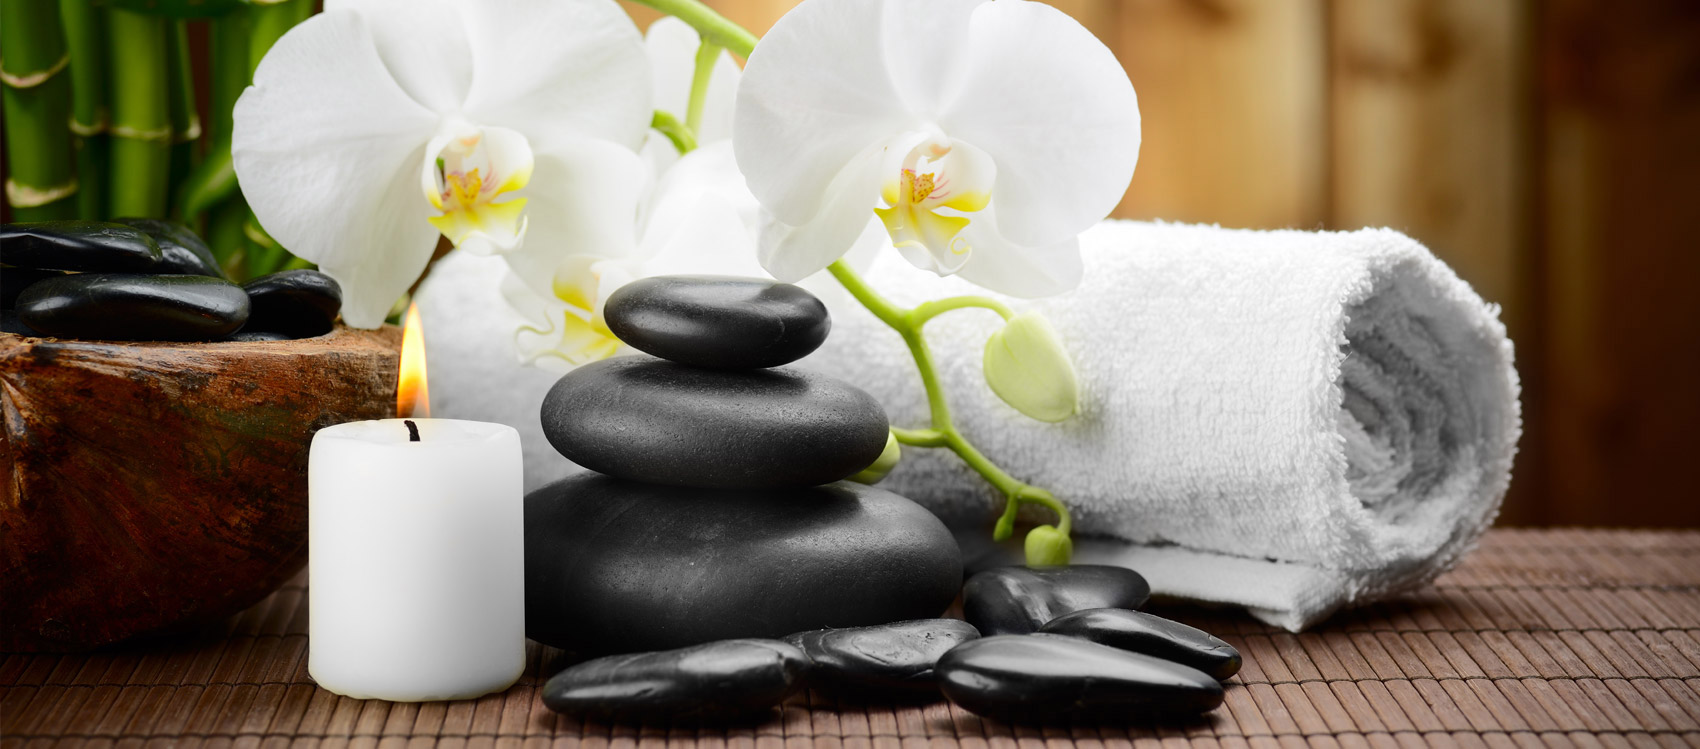 Flowers, towels and a balanced stack of massaging stones